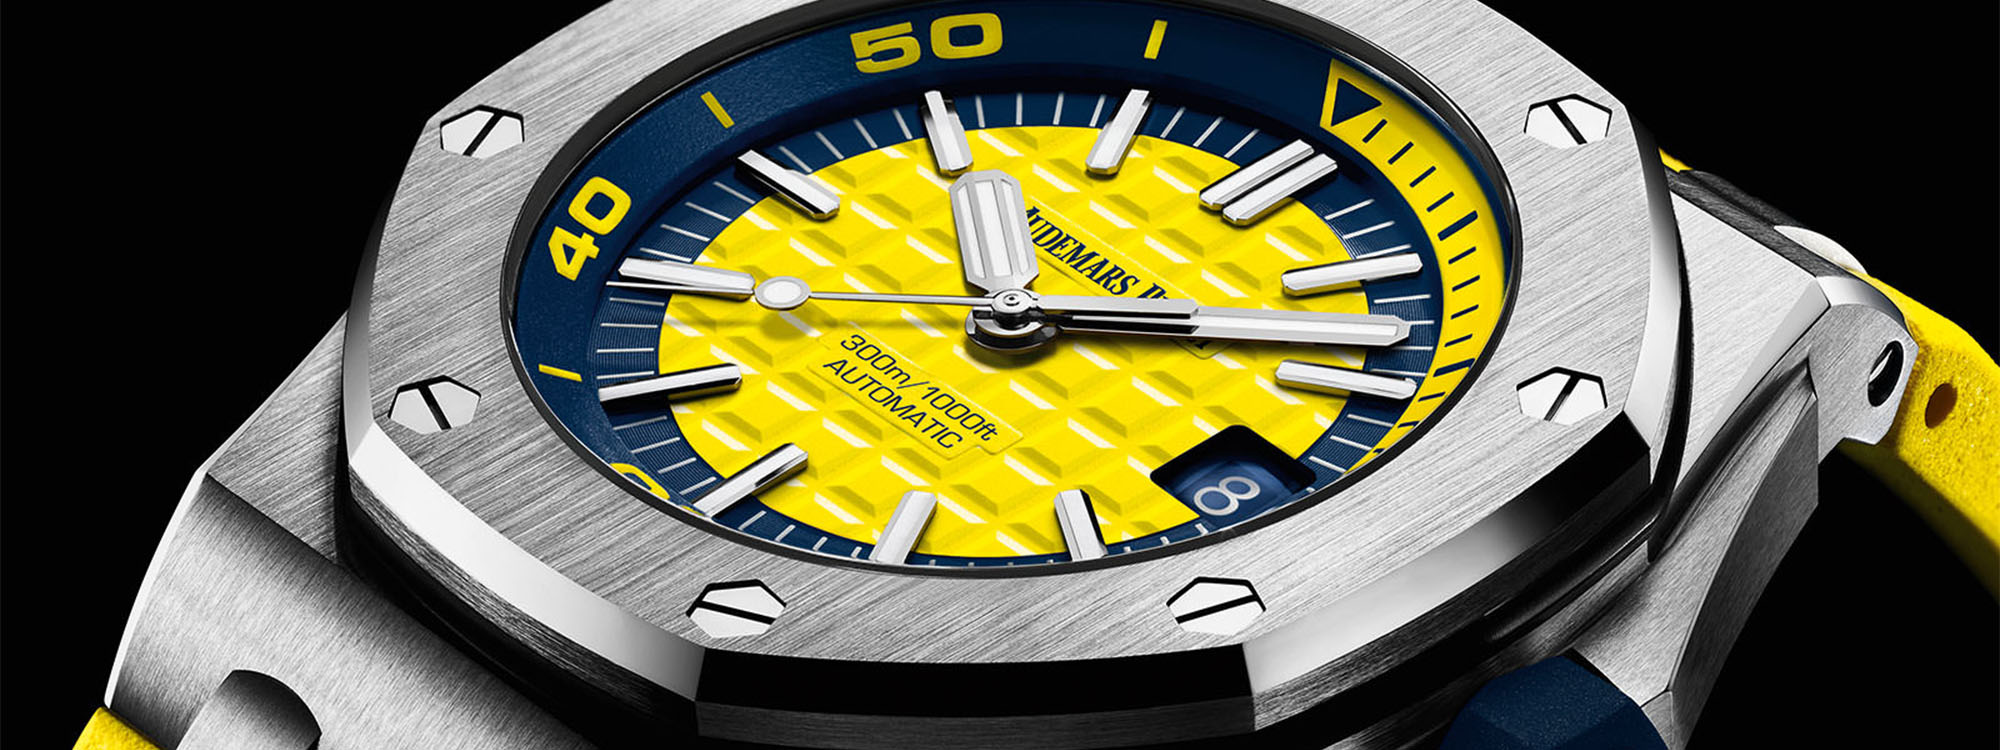 12 Yellow-Dial Watches From Affordable to Luxury